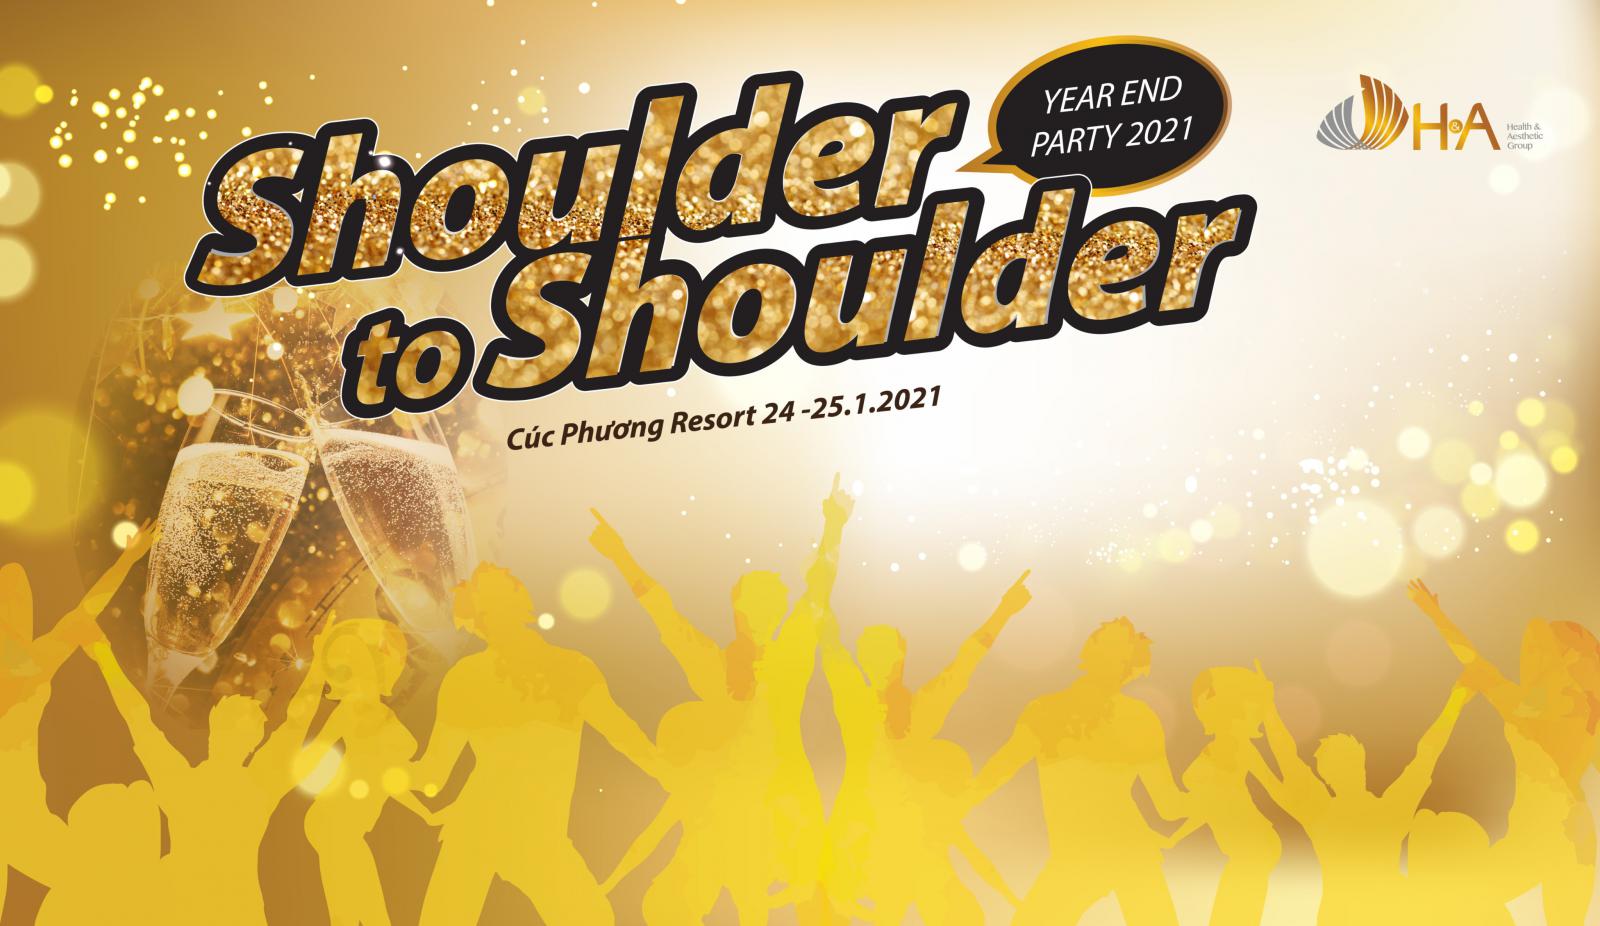 H&A GROUP YEAR END PARTY 2020 - SHOULDER TO SHOULDER